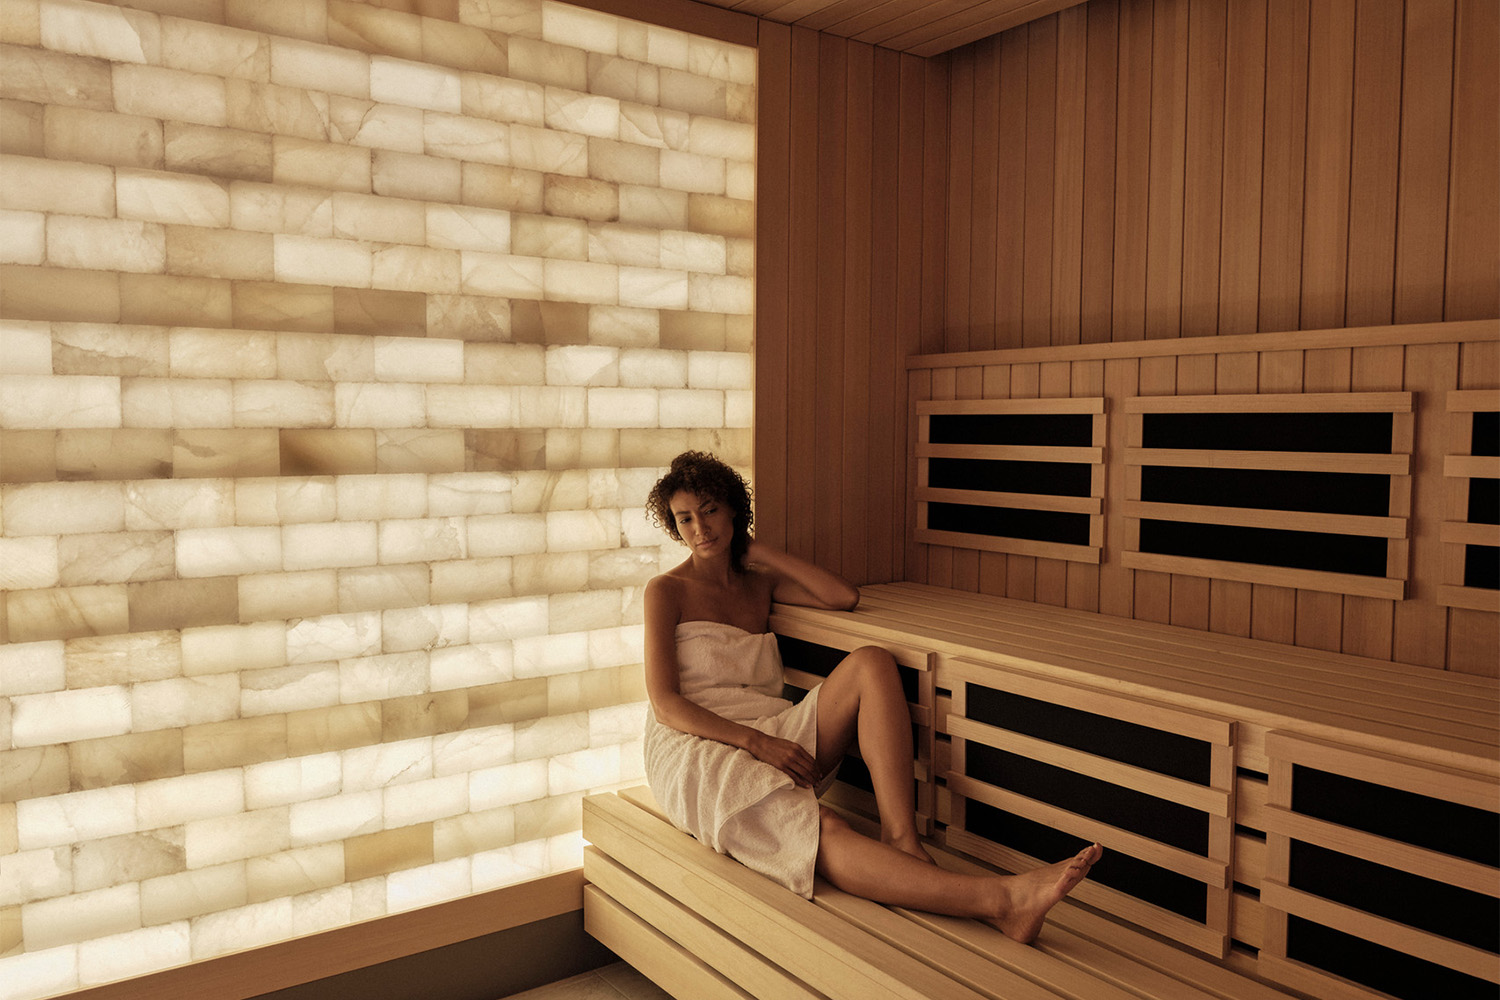 The Sauna at the Four Seasons Fort Lauderdale